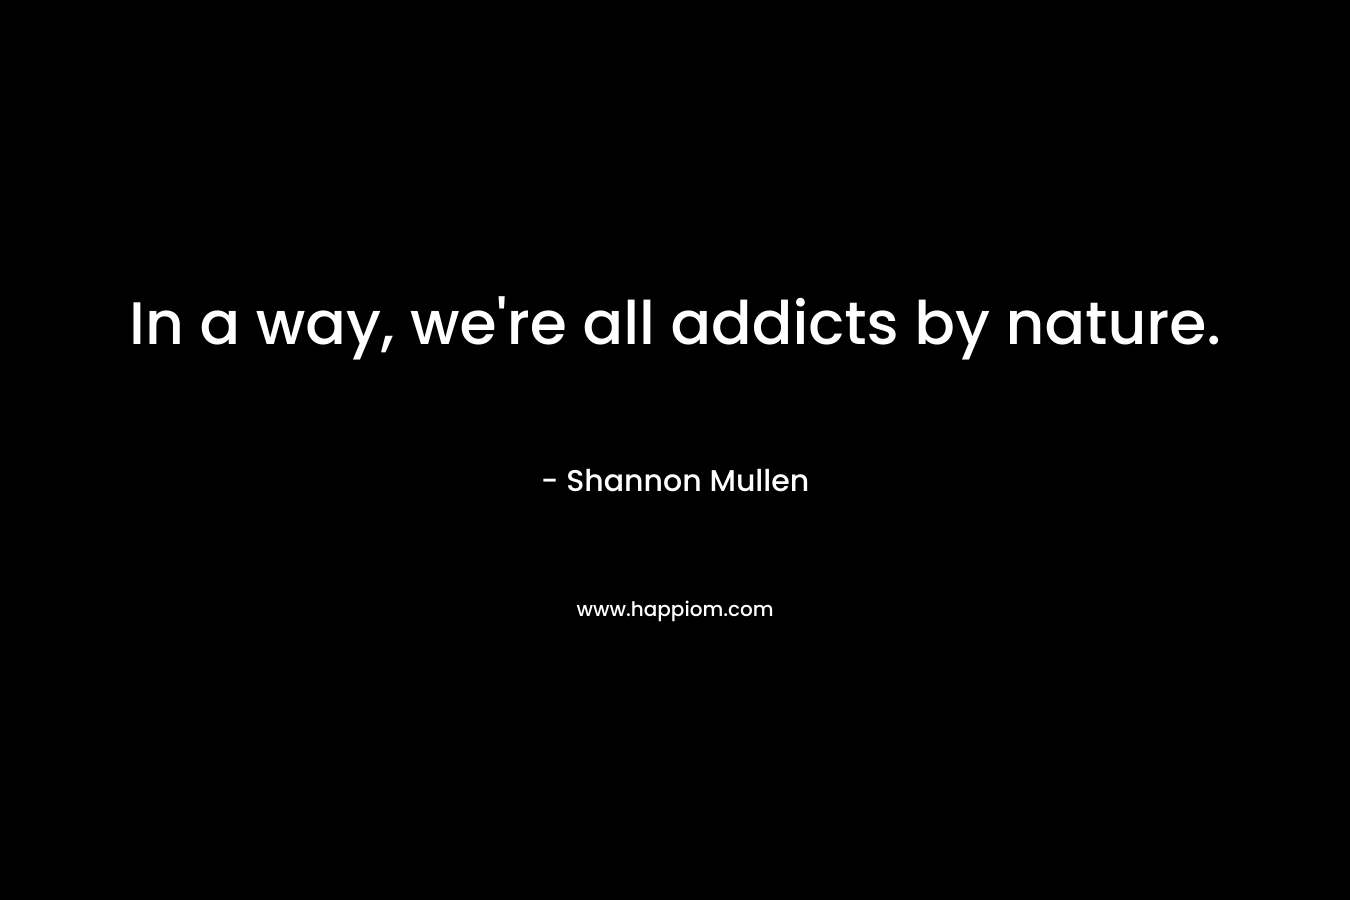 In a way, we're all addicts by nature.